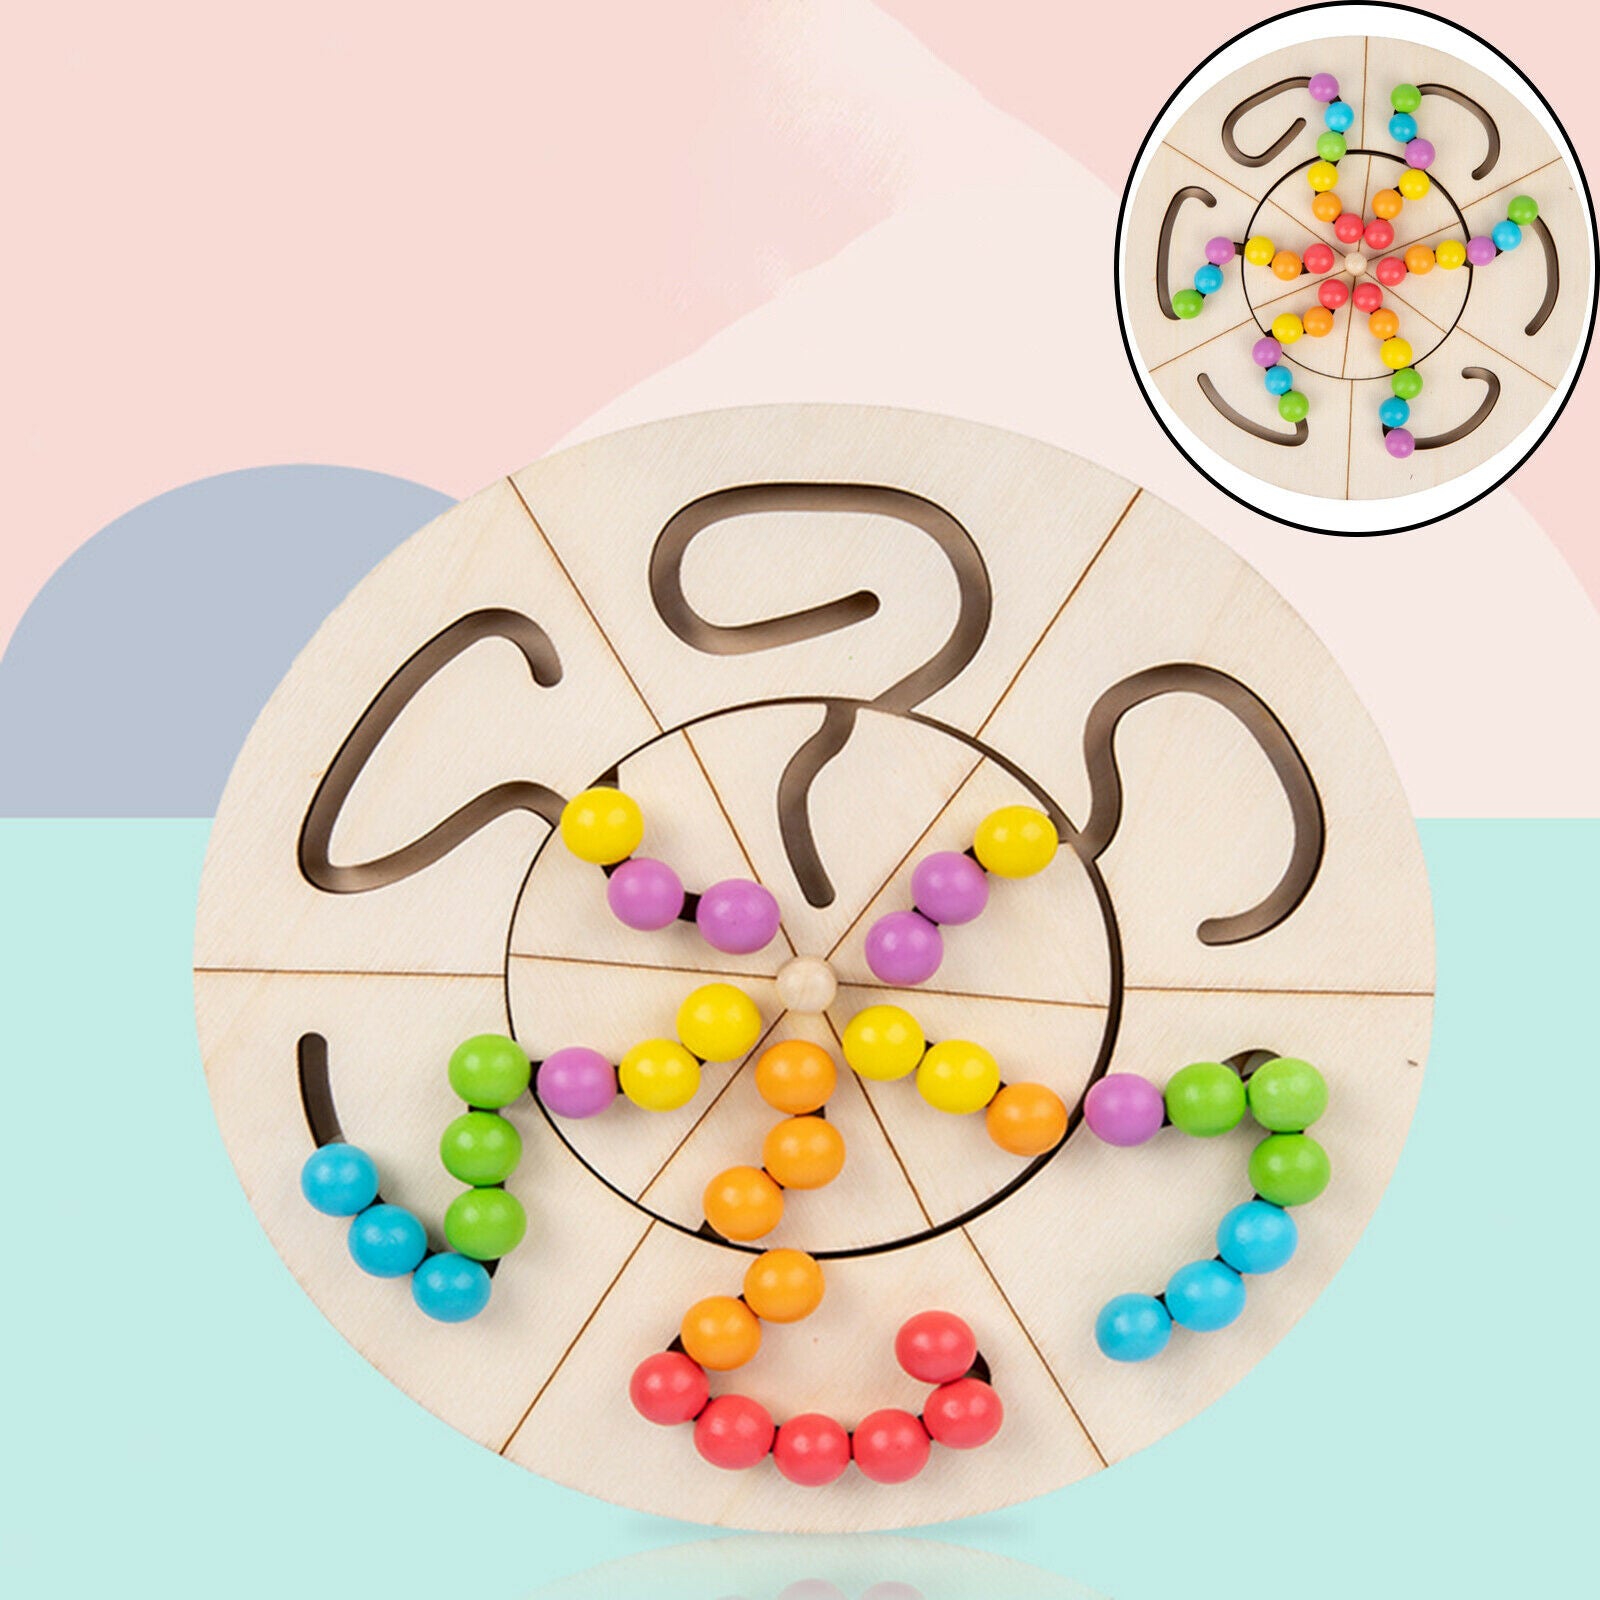 Bead Maze Puzzle Toys Multifunctional Infant Educational Board Game Gift